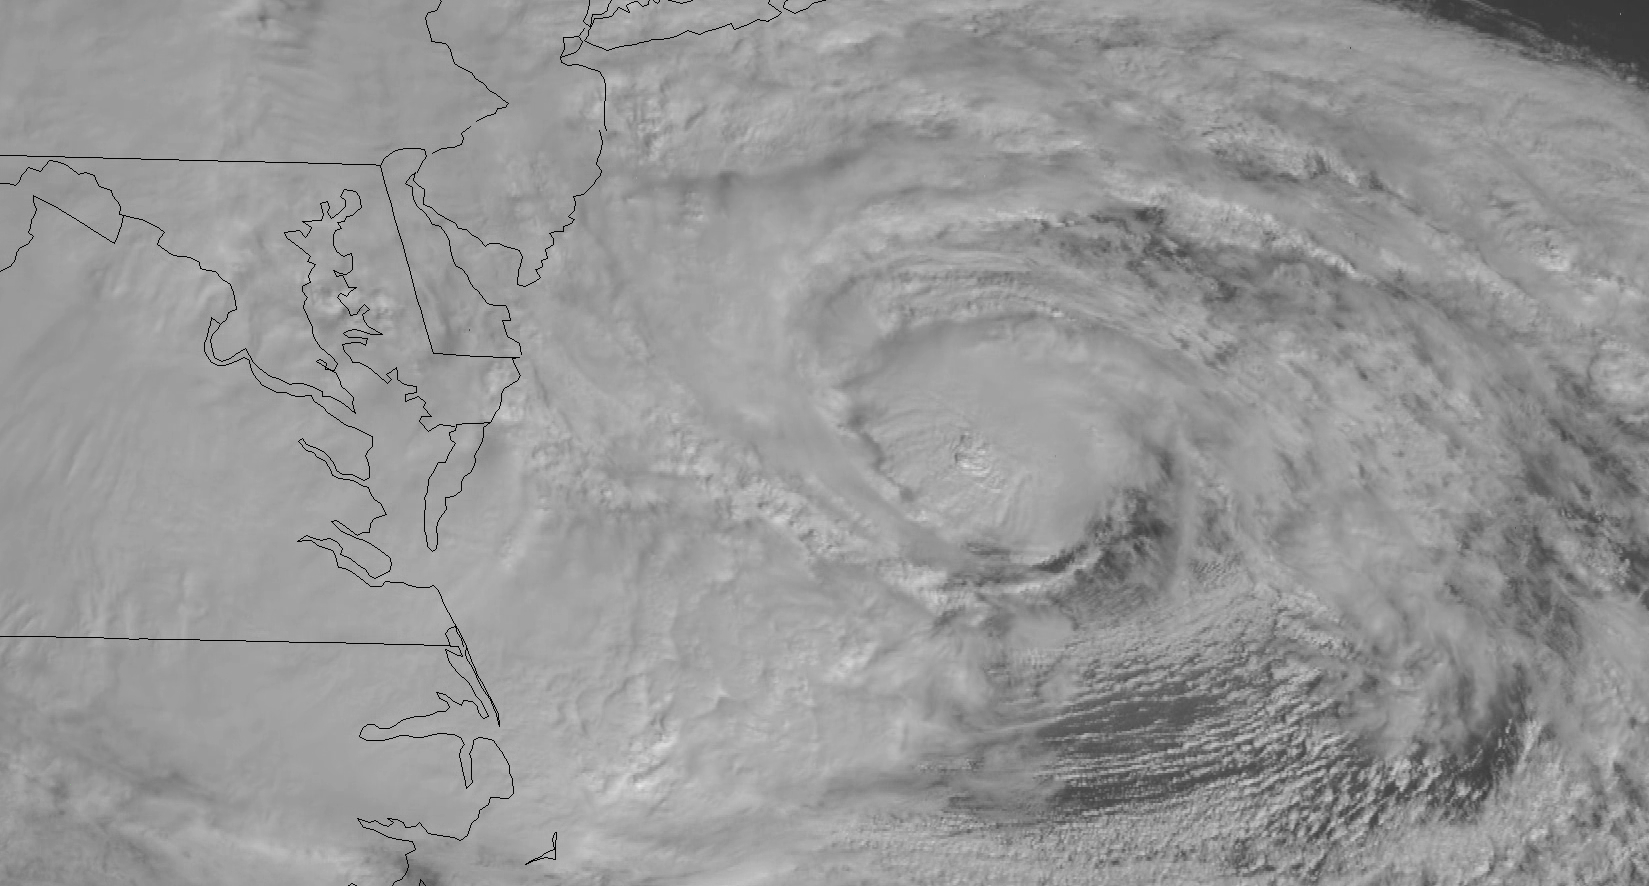 GOES-14 0.63 Âµm visible channel images (click image to play HD format QuickTime movie)